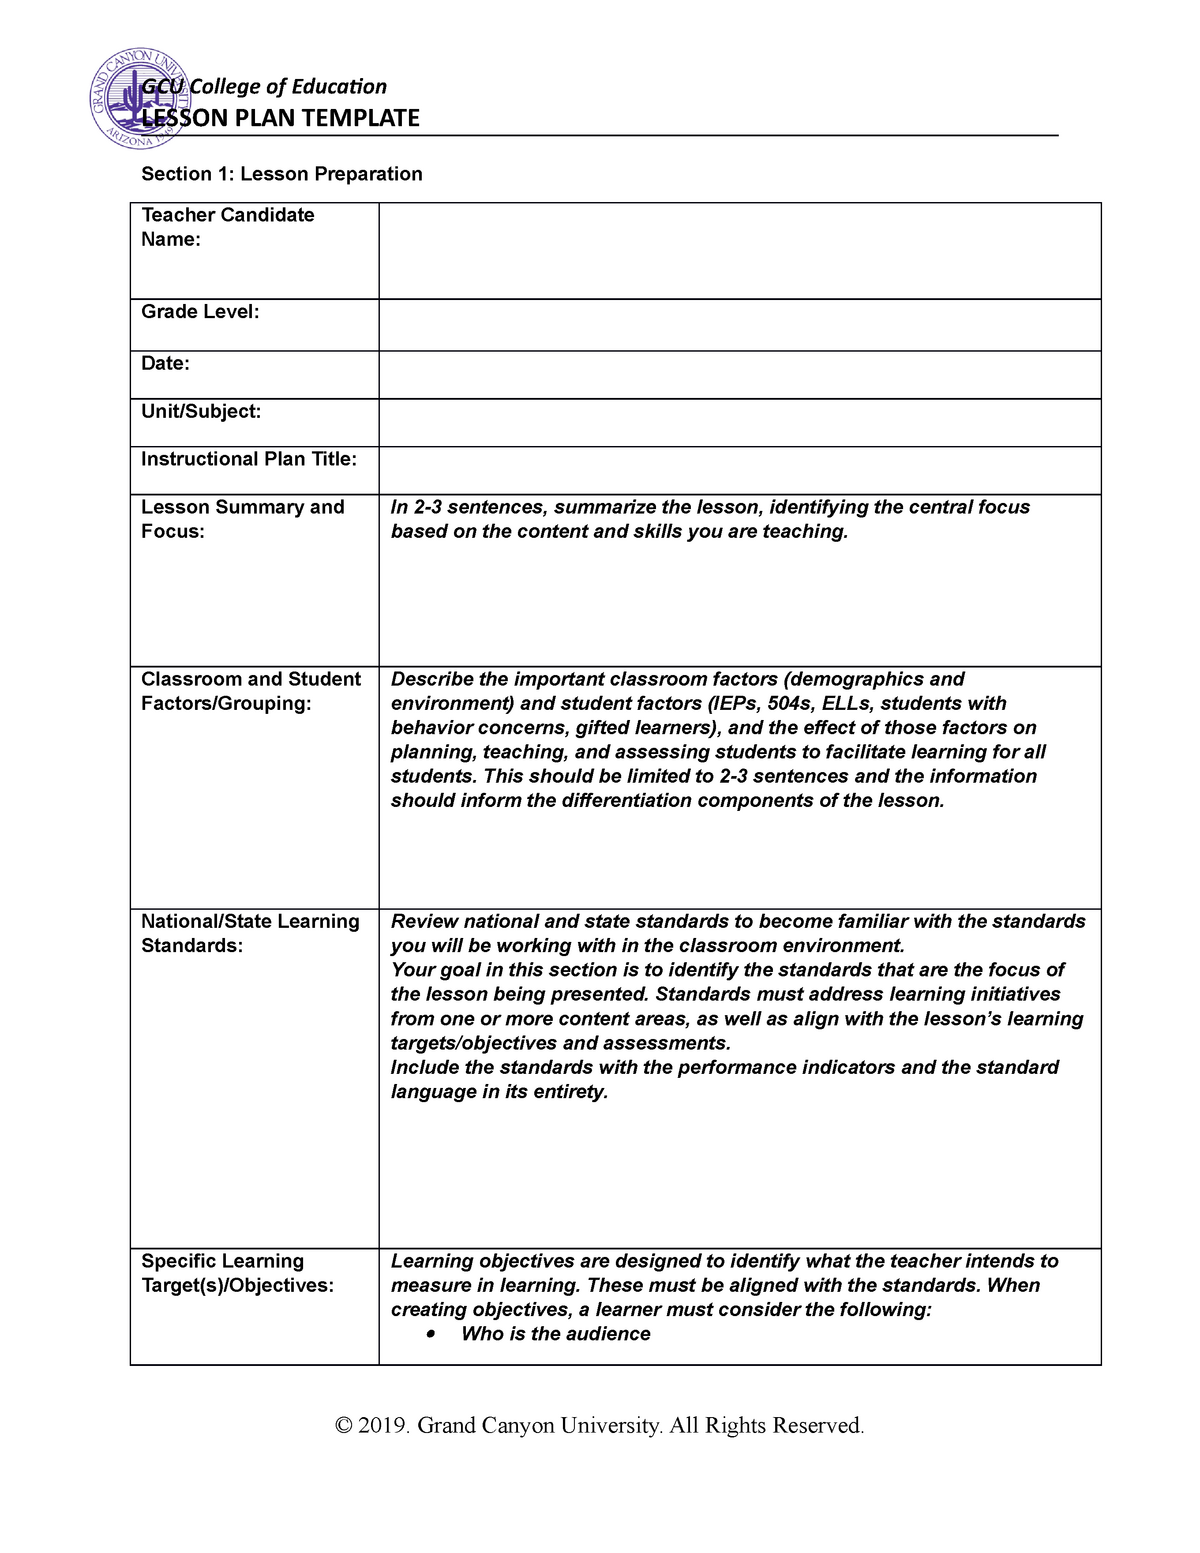 Coe Lesson Plan Template Lesson Plan Template Section 1 Lesson